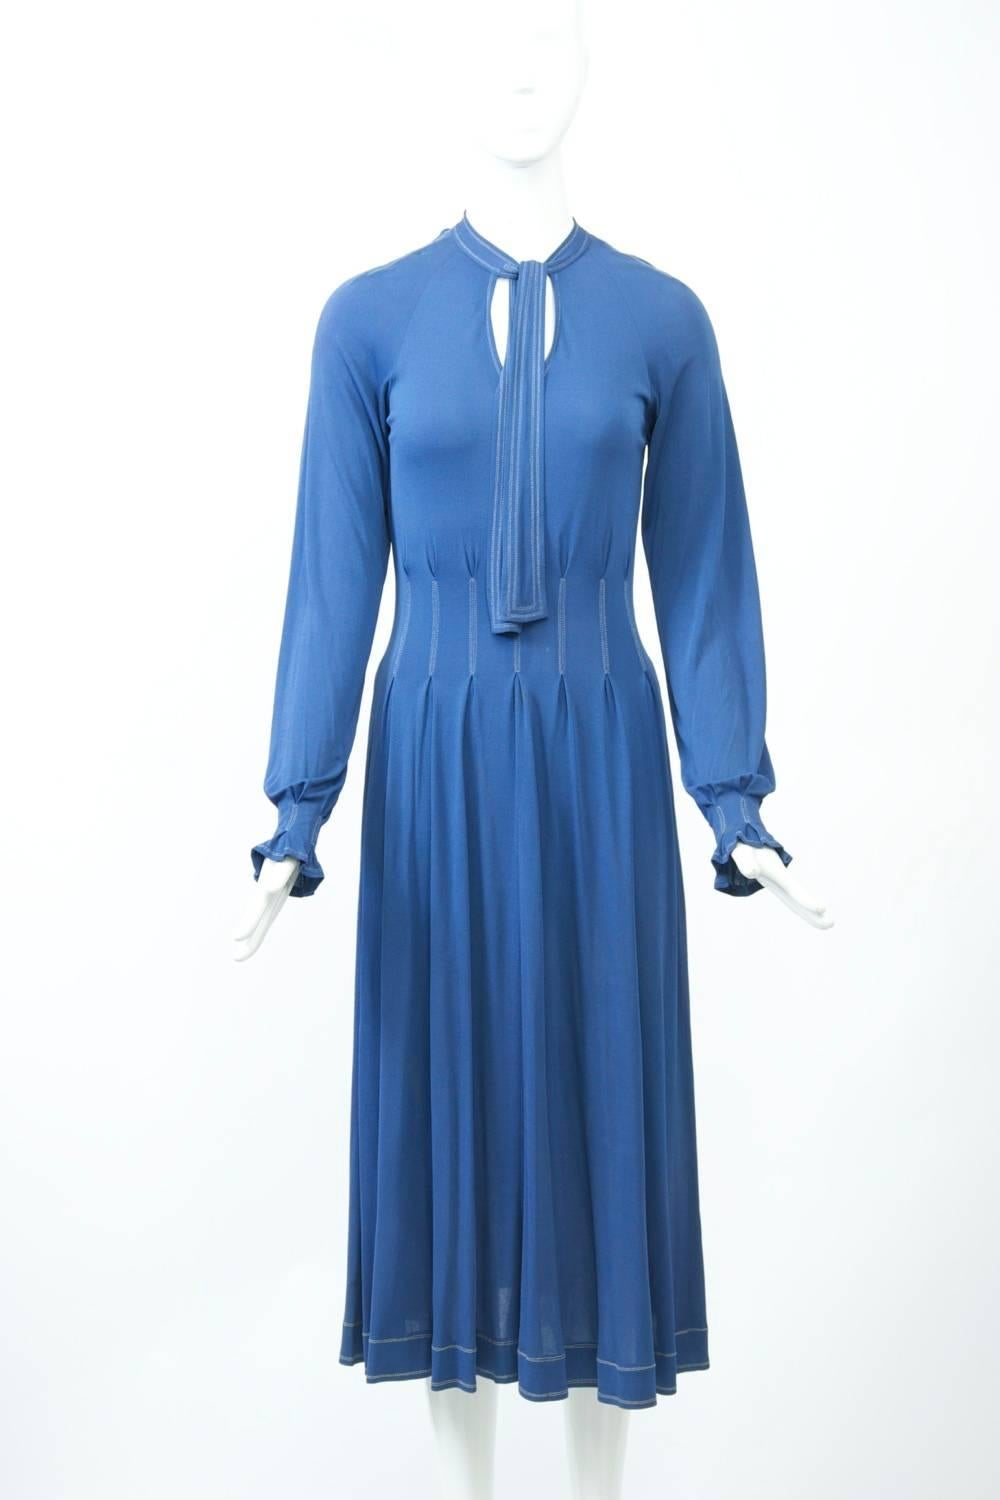 Jean Muir steel blue dress, c.1979s featuring her characteristic details - matter jersey fabric, contrasting stitching, and tie neckline. On this example, the waist area has interval pleating accented with the white stitching that highlights the